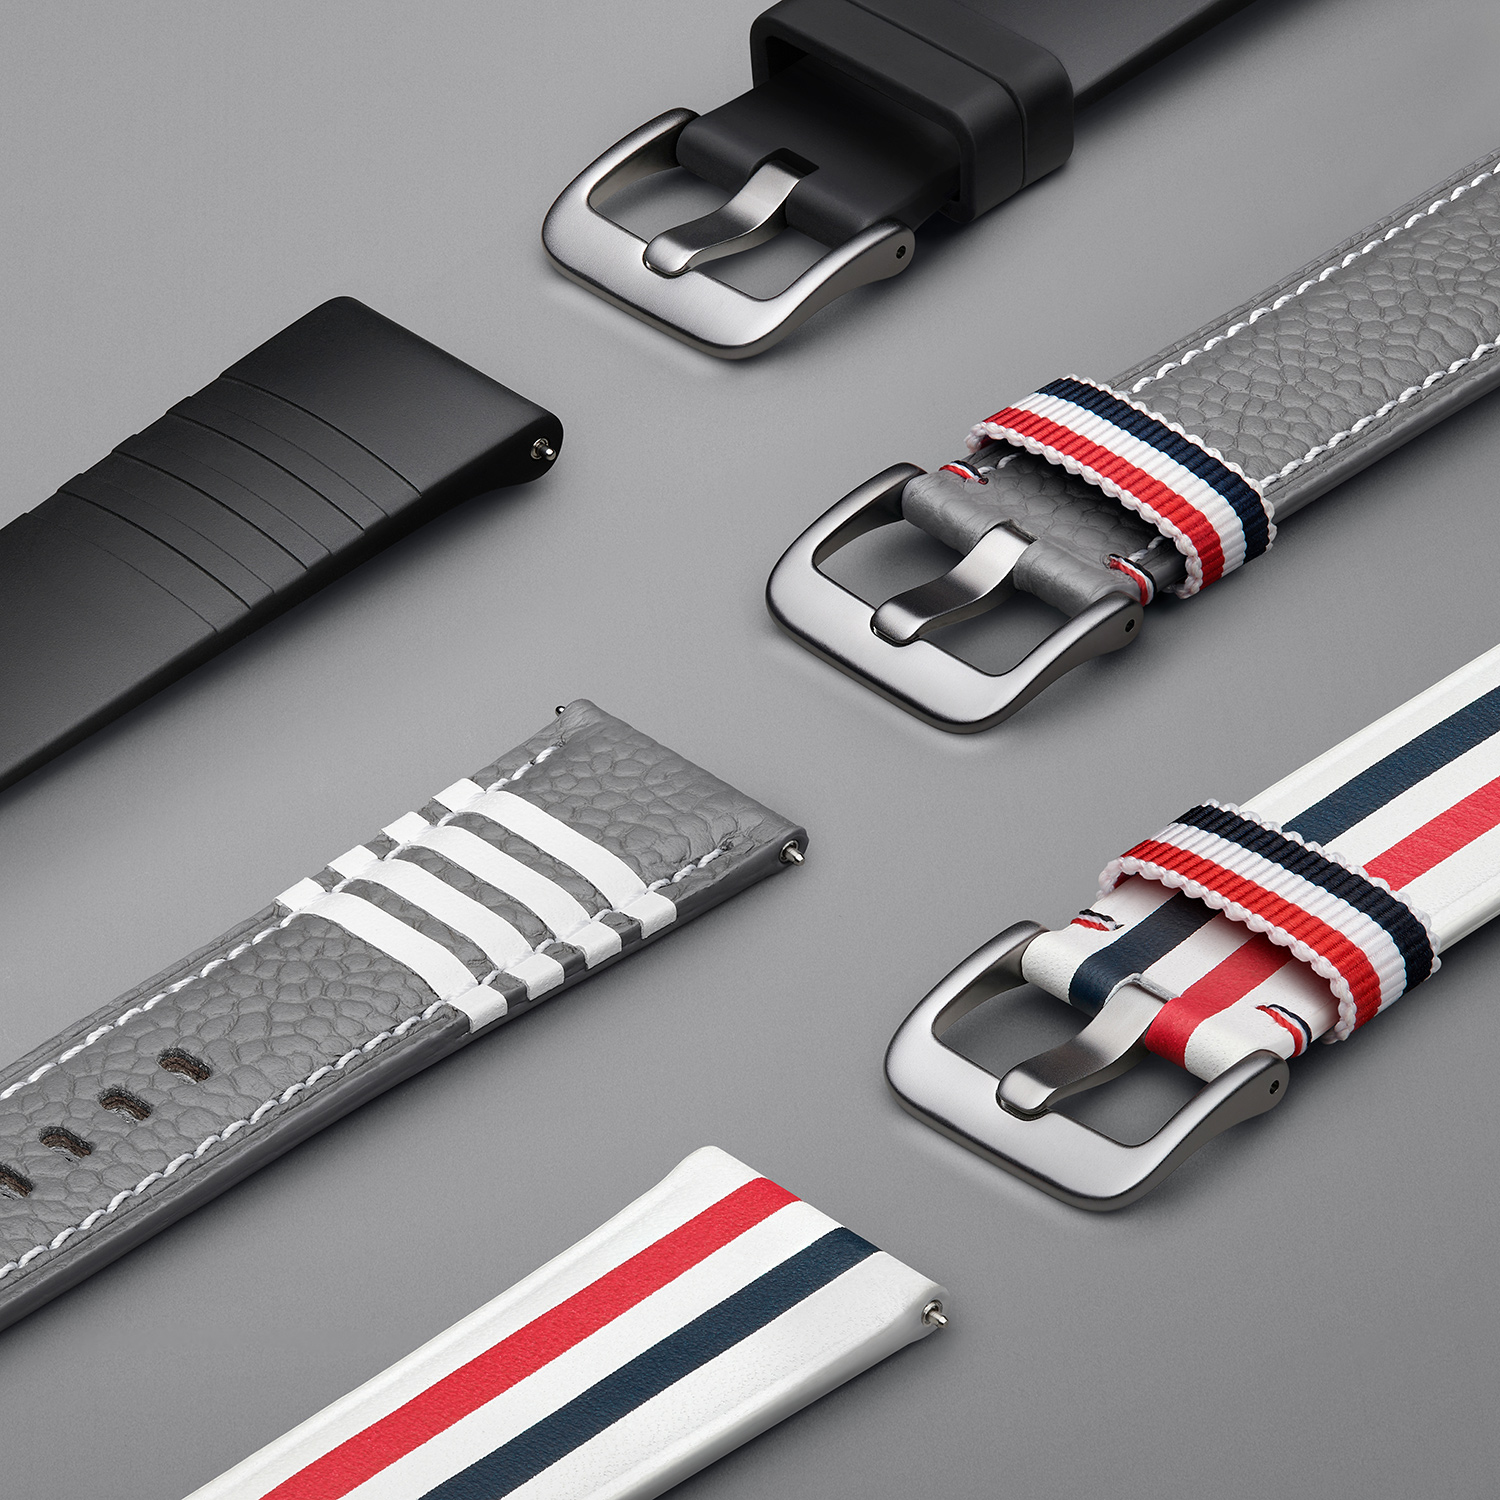 Watch bands designed by Thom Browne for the Galaxy Watch3. Close shot.